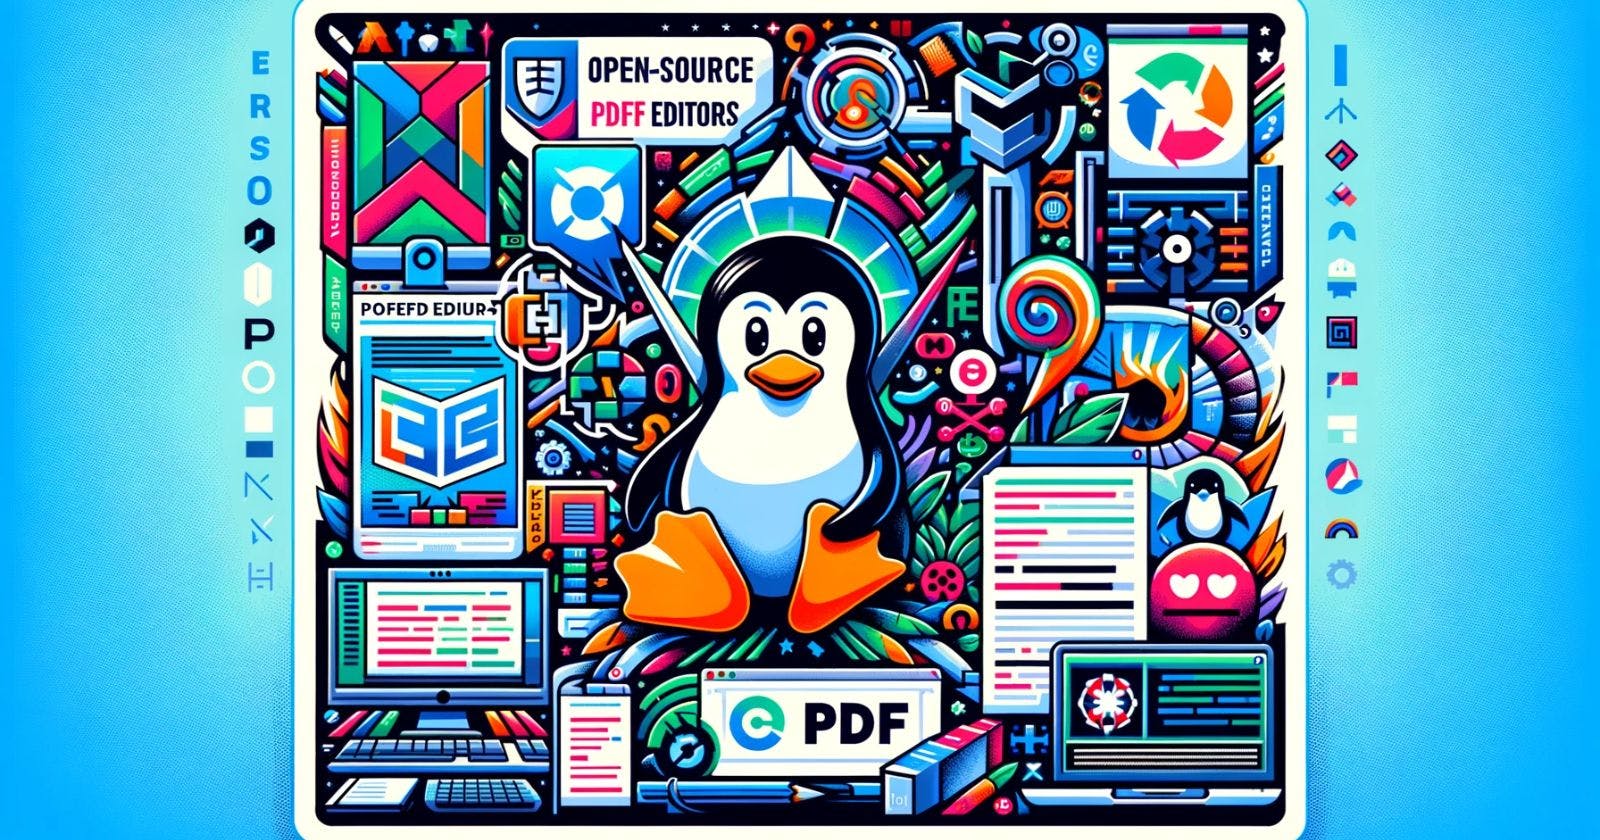 Open-Source PDF Editors for Everyone: A Linux Expert's Guide